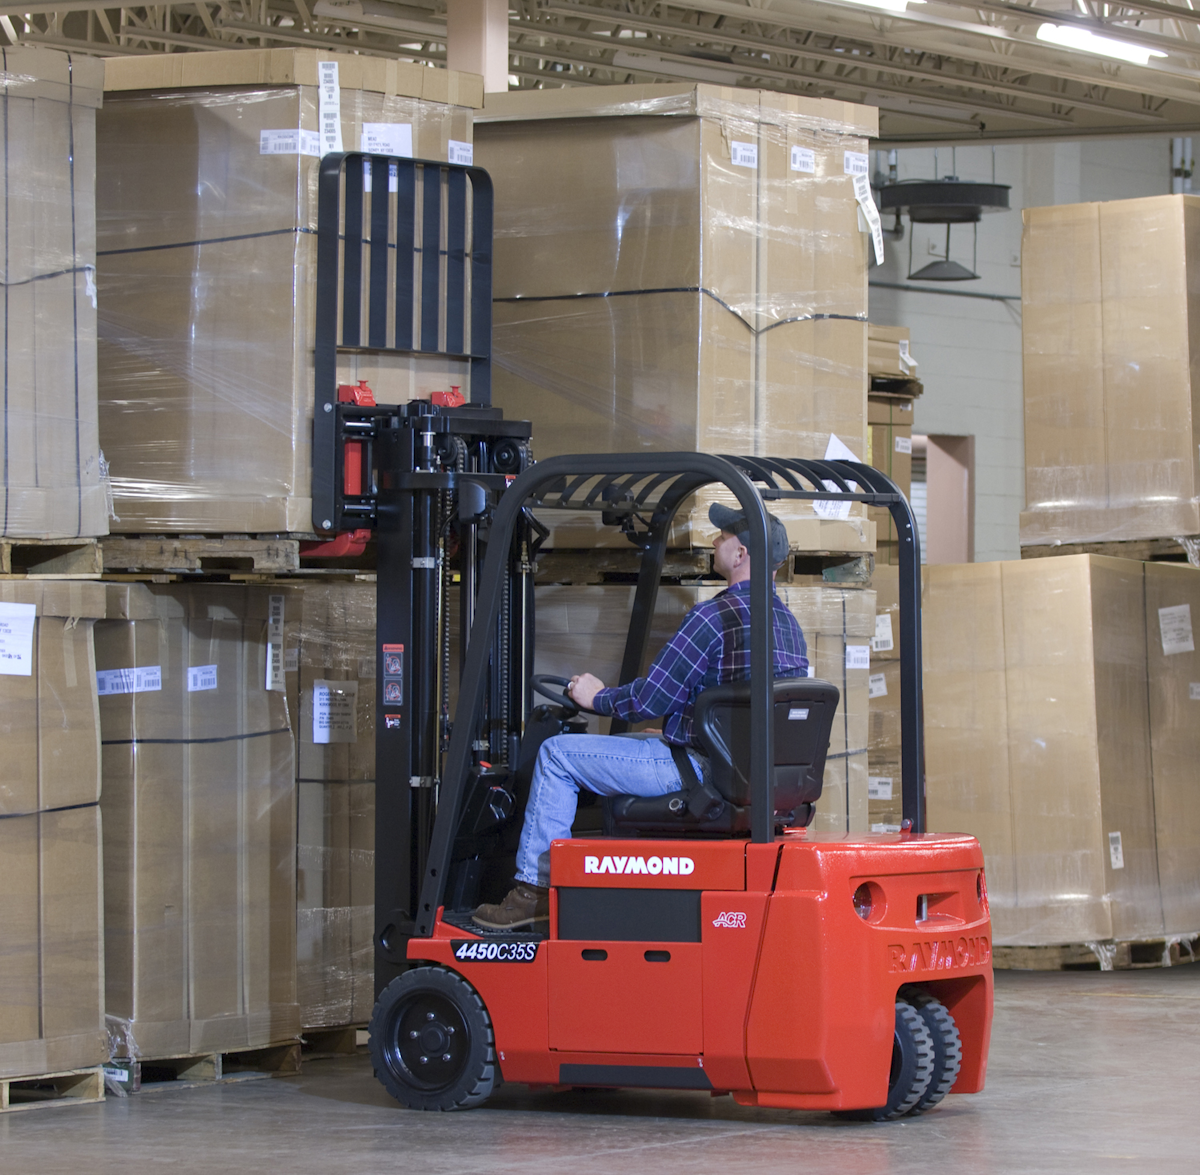 3 Wheel Sit Down Lift Truck Material Handling And Logistics